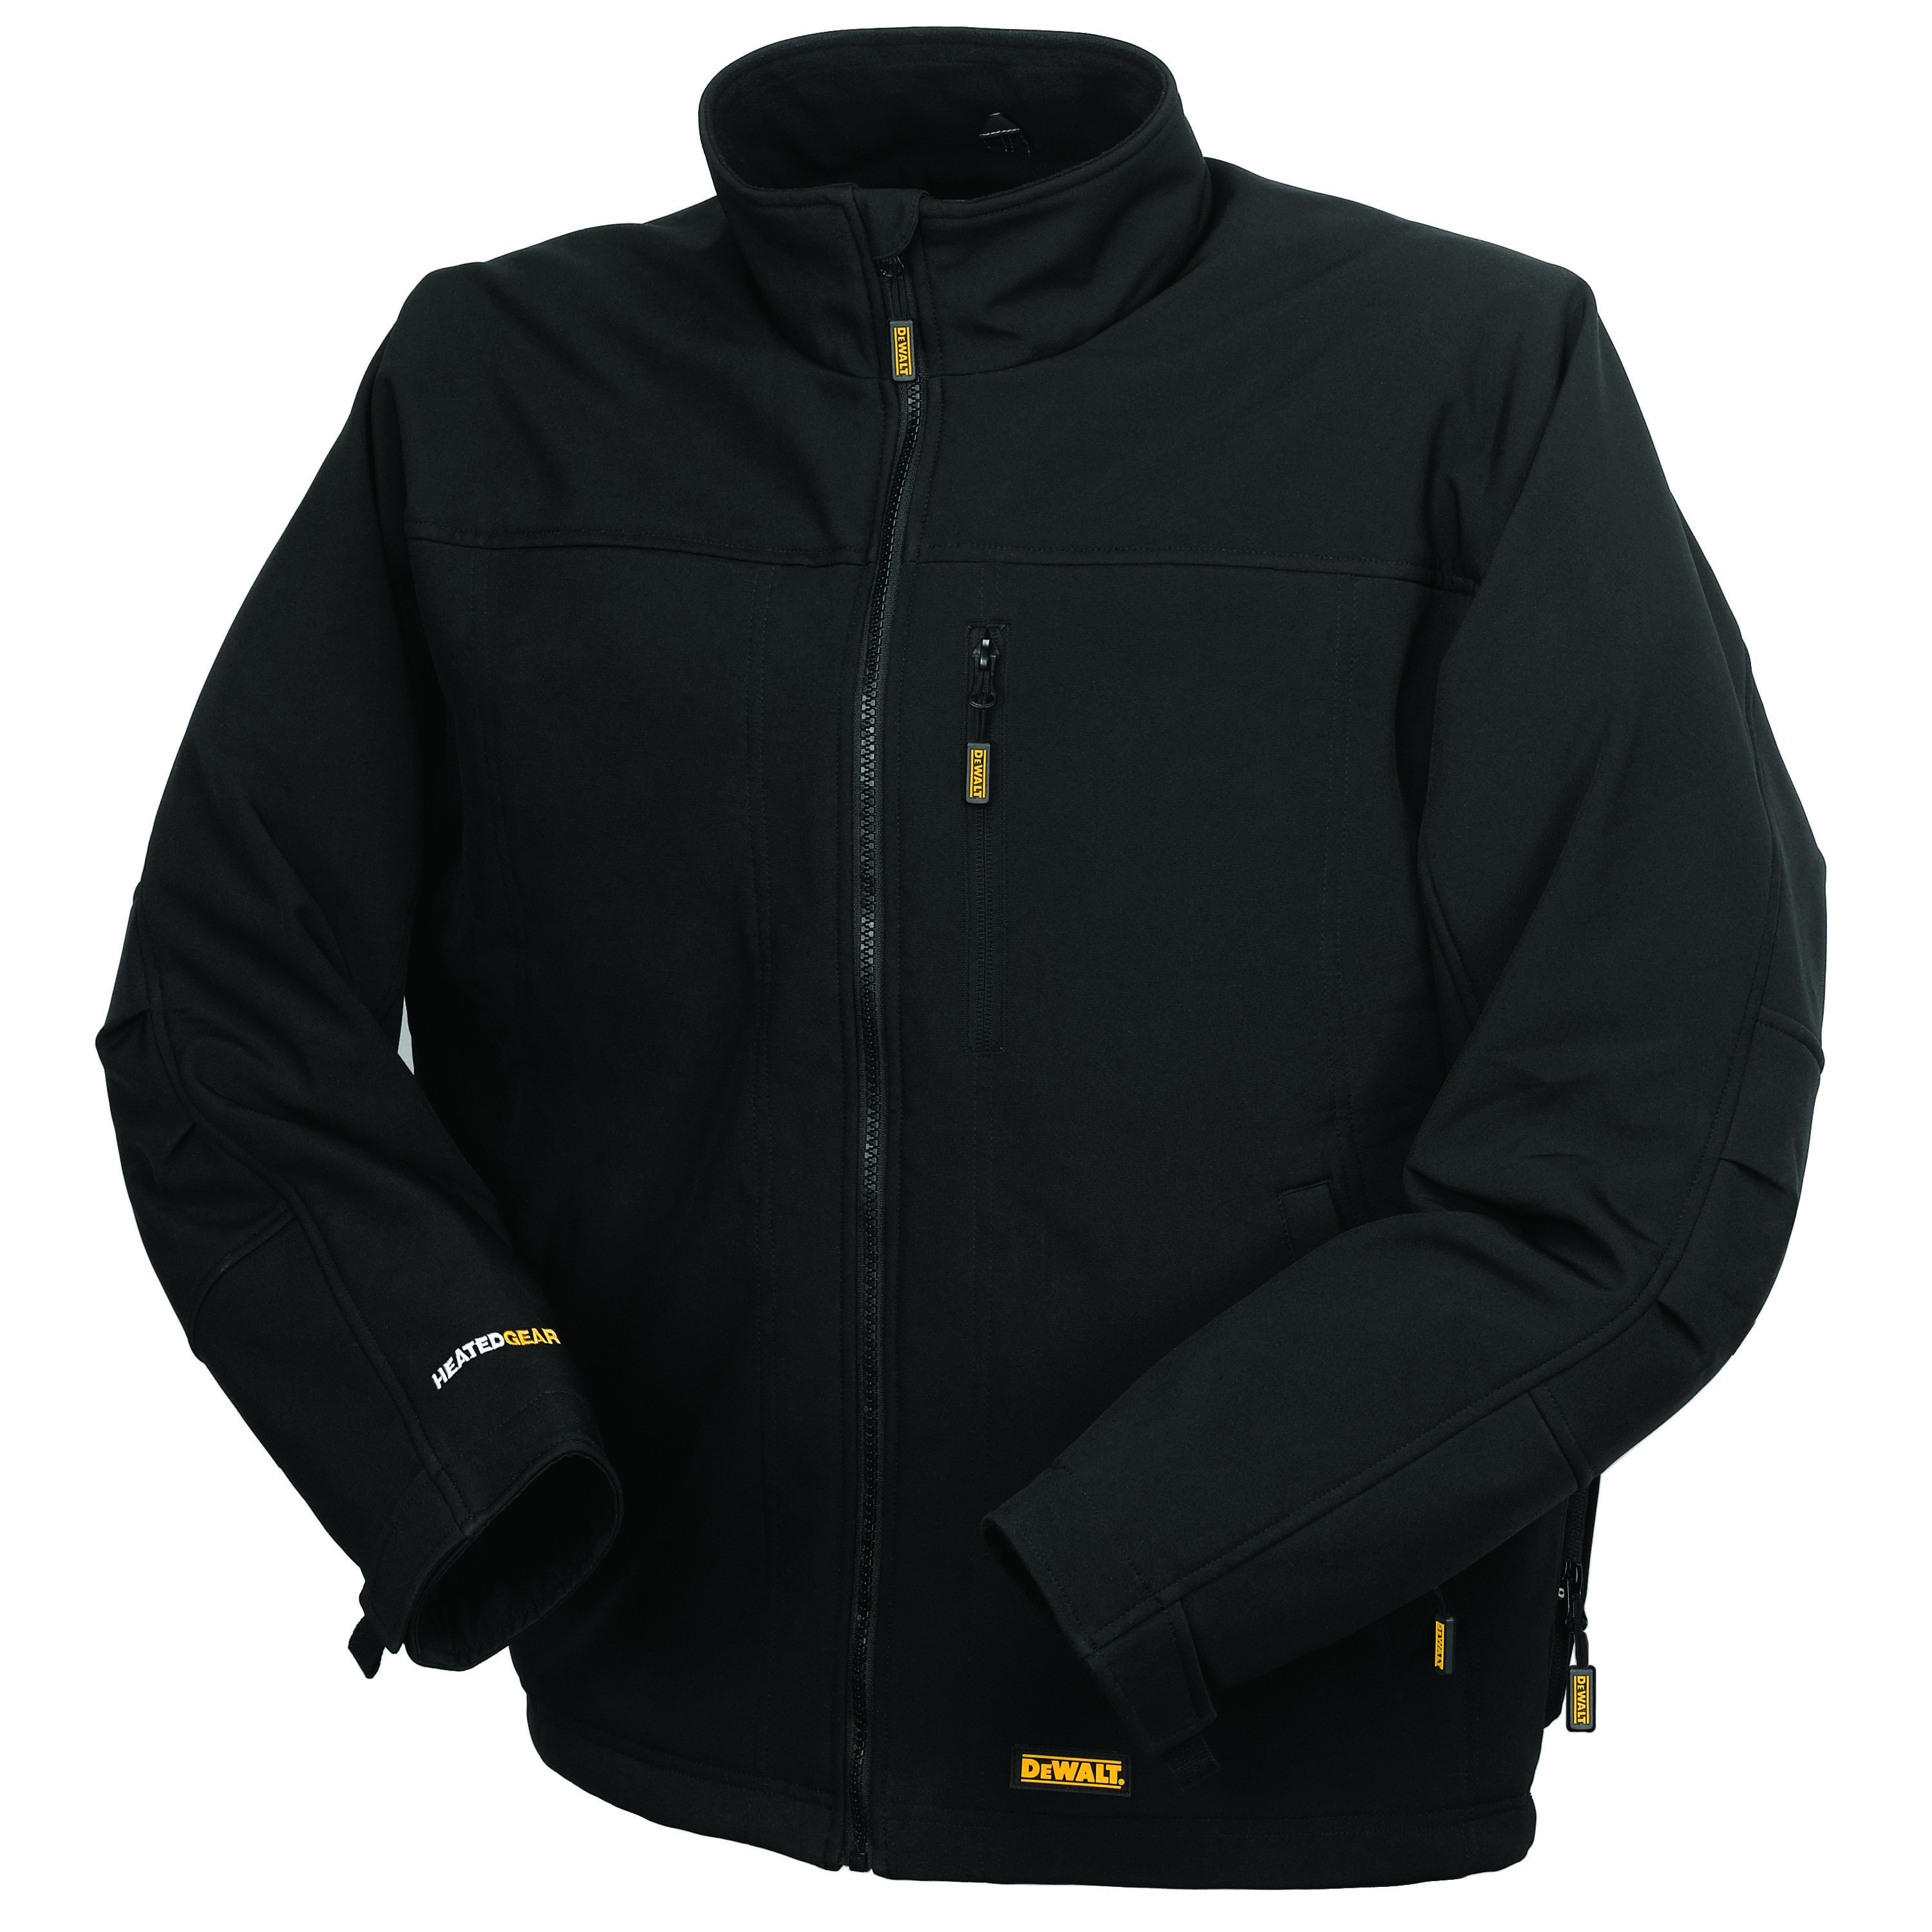 Men's Heated Soft Shell Jacket without Battery - Black - Size 3X